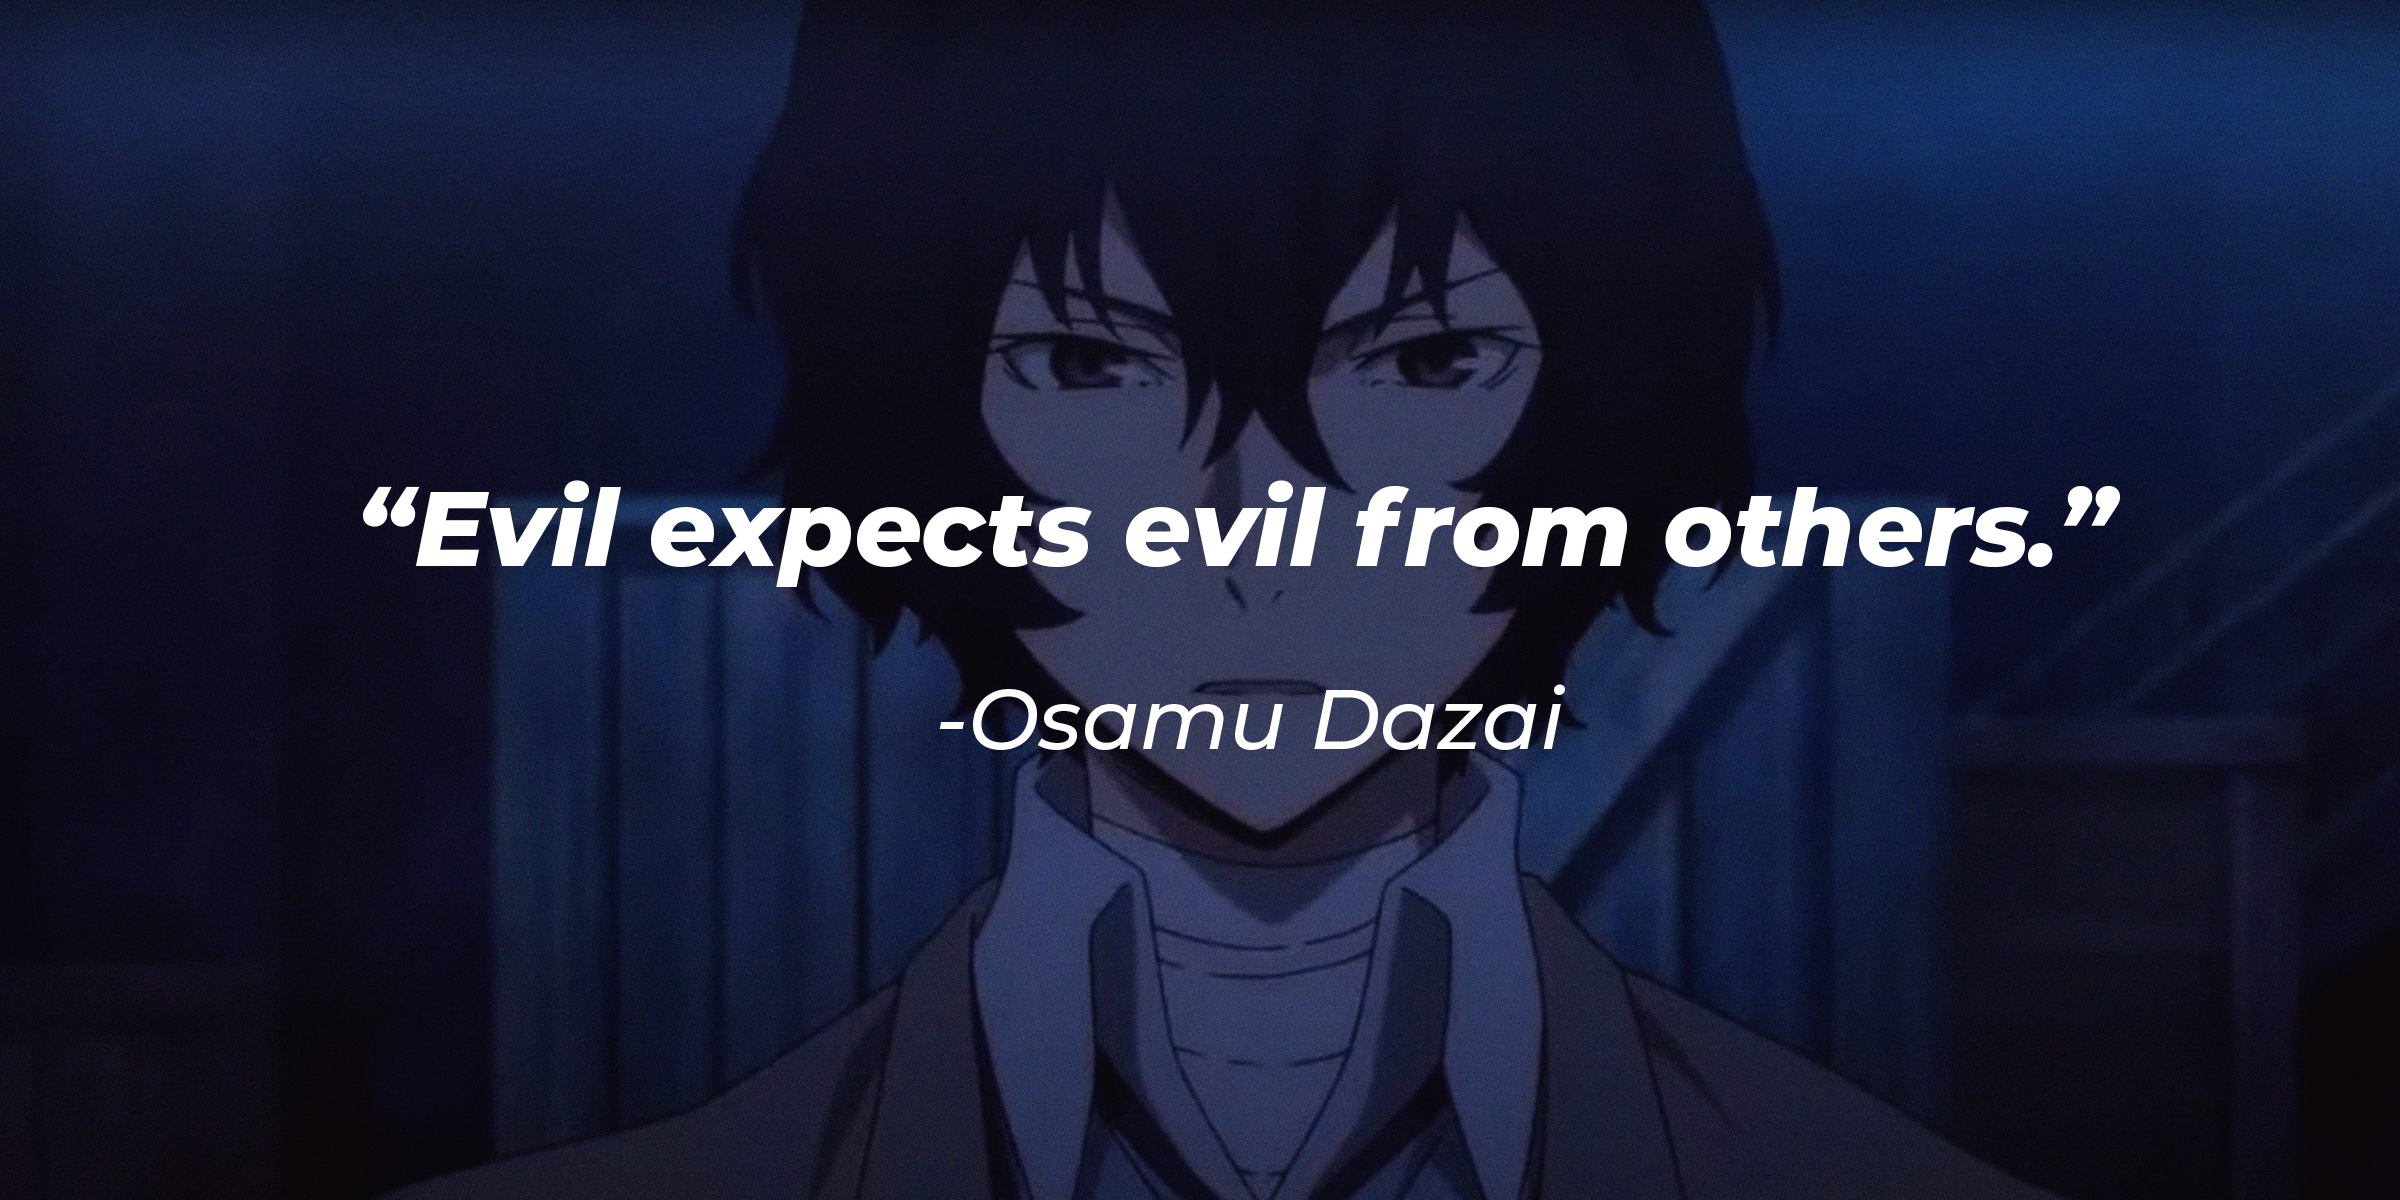 A picture of Osamu Dazai with his quote, “Evil expects evil from others.” | Source: facebook.com/bungotales